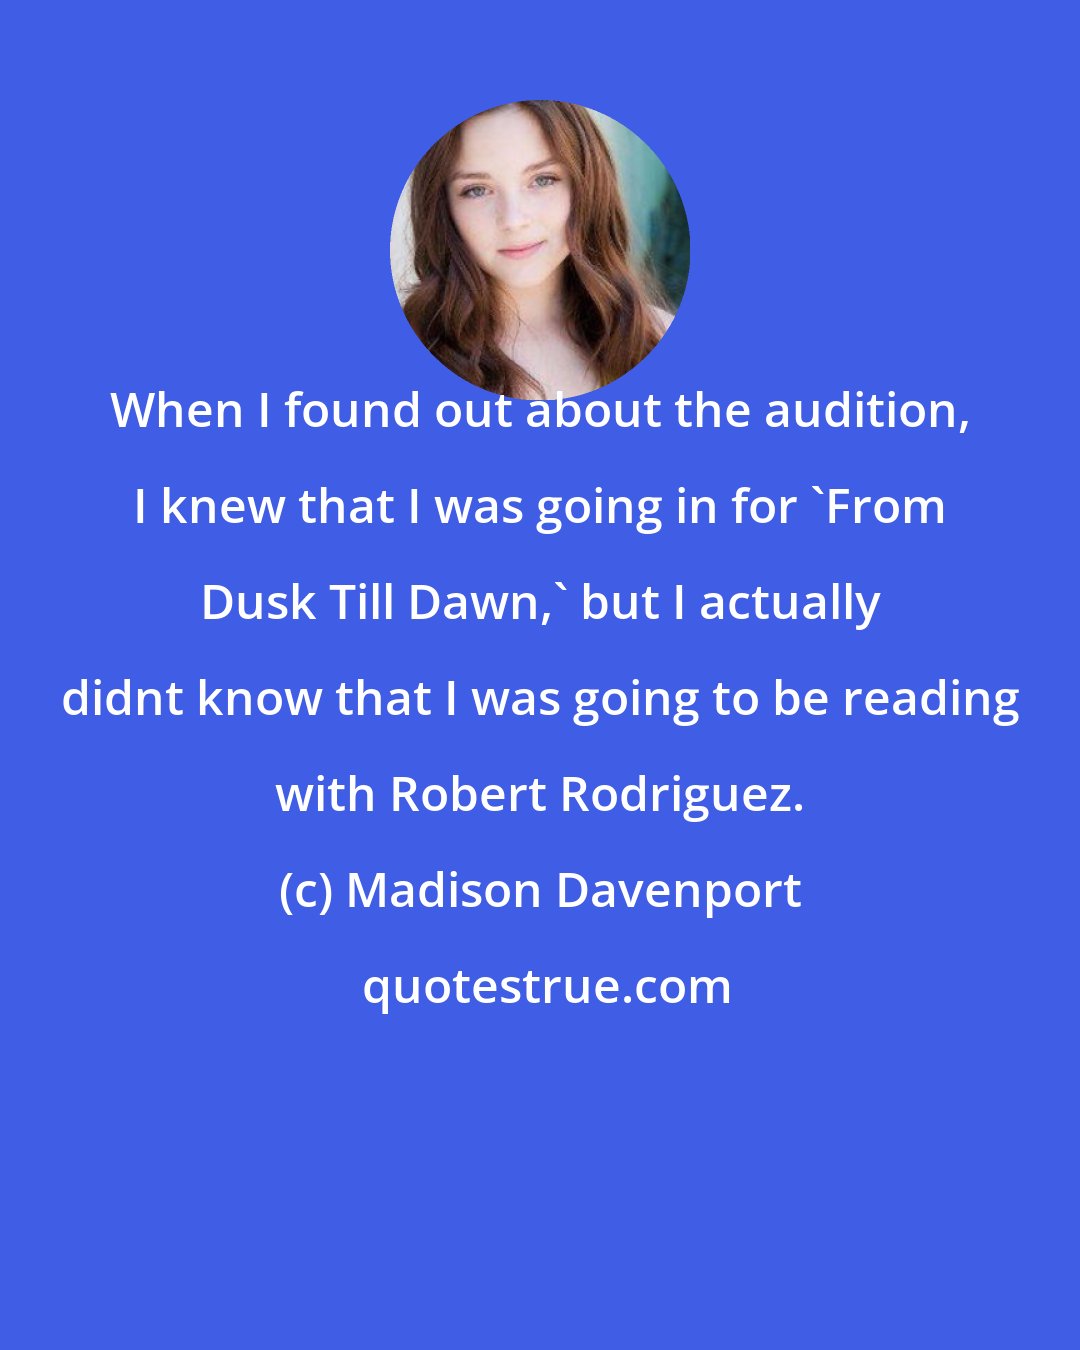 Madison Davenport: When I found out about the audition, I knew that I was going in for 'From Dusk Till Dawn,' but I actually didnt know that I was going to be reading with Robert Rodriguez.